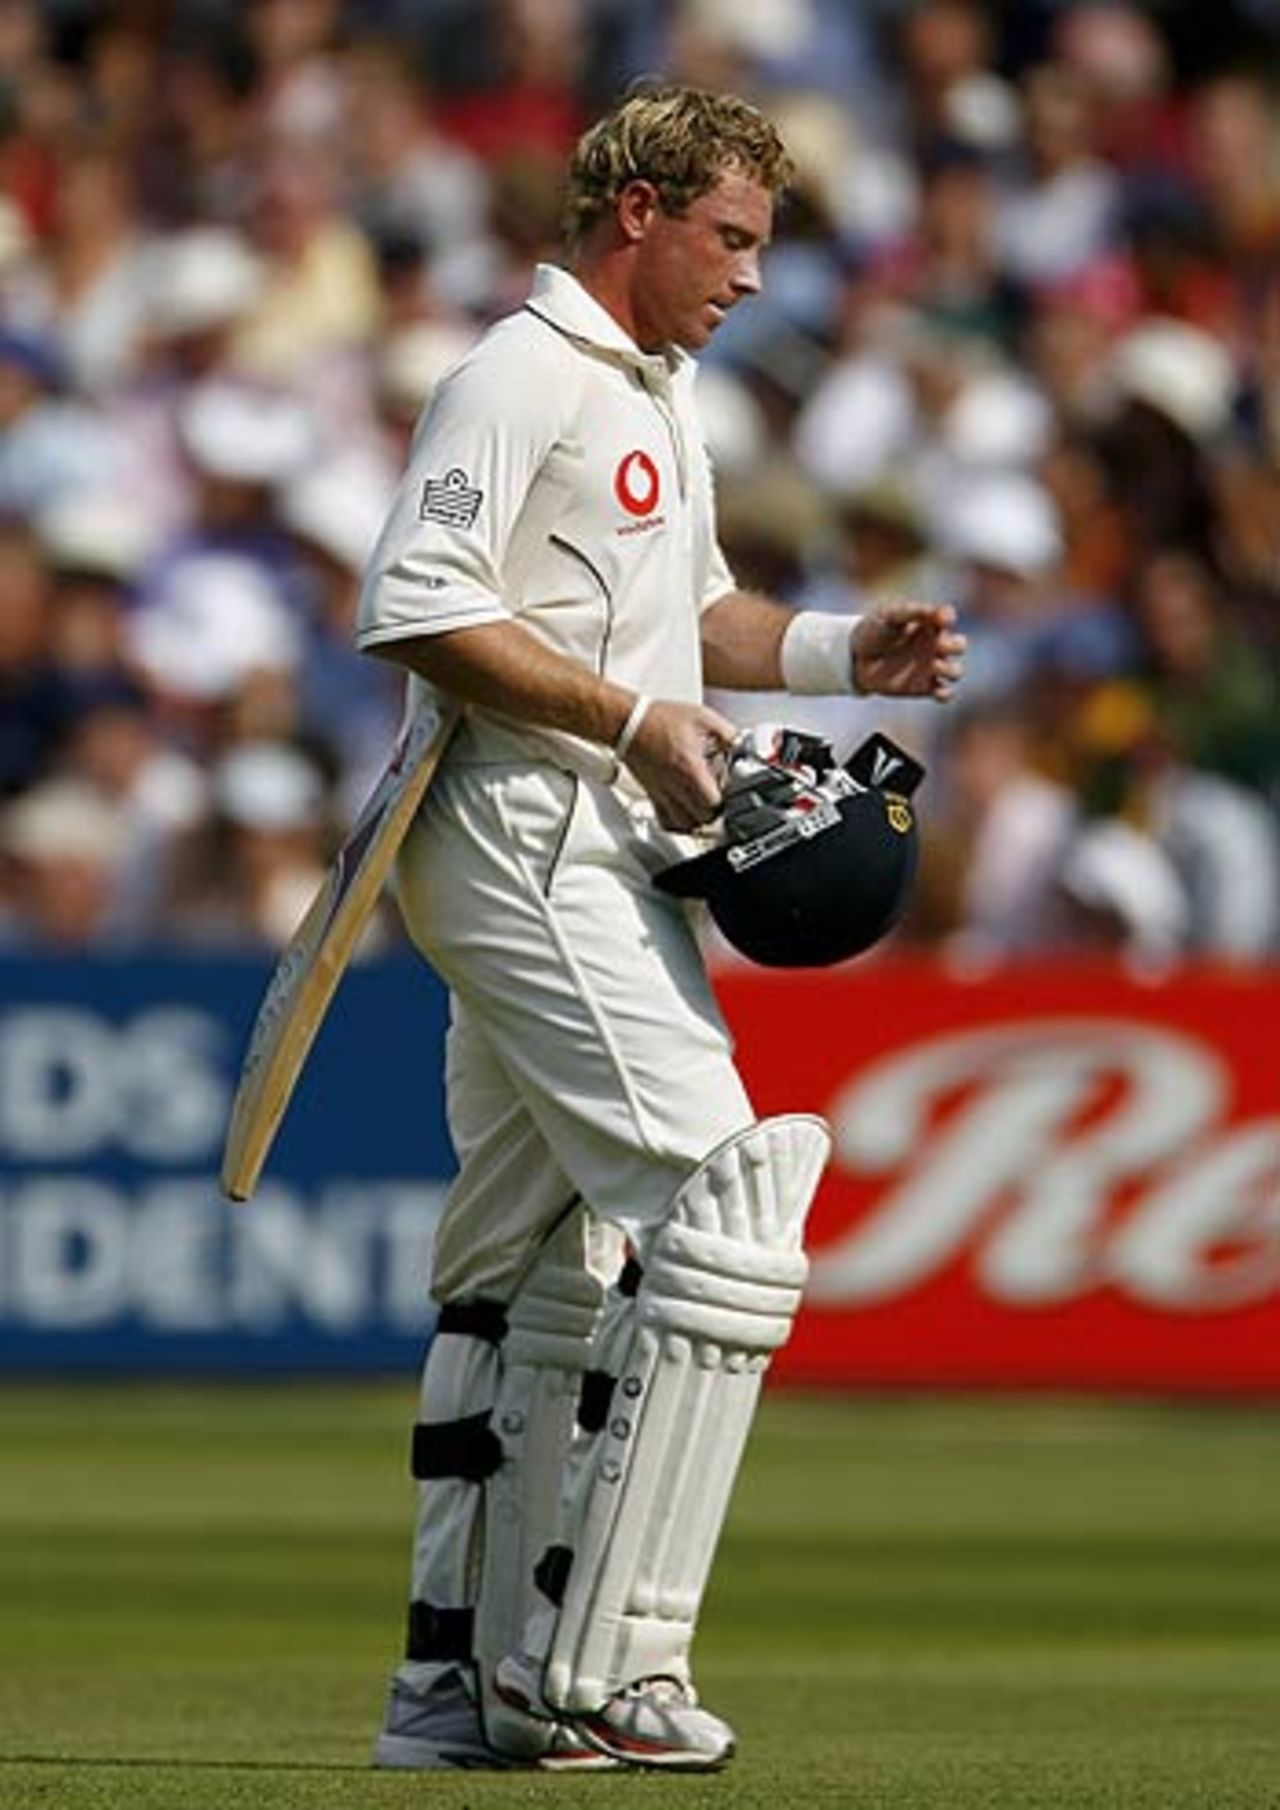 A disconsolate Ian Bell walks off after failing to beat a direct hit, England v Pakistan, 1st Test, Lord's, July 16, 2006